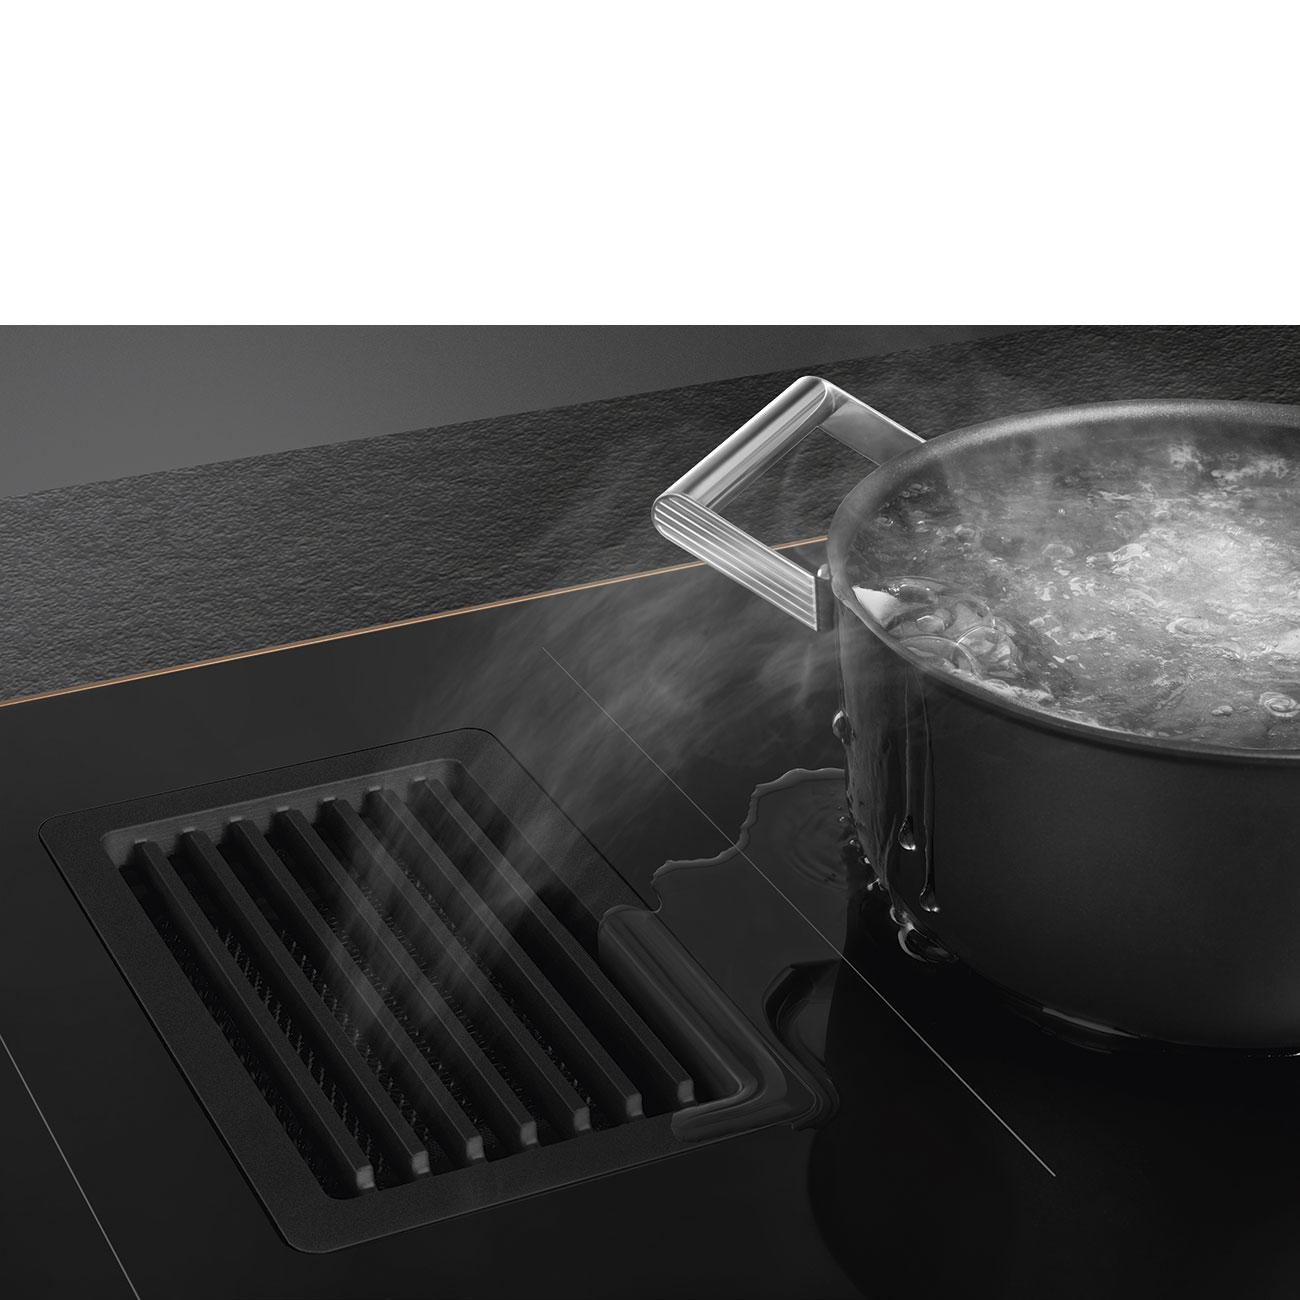 Induction with integrated hood Hob Smeg_8